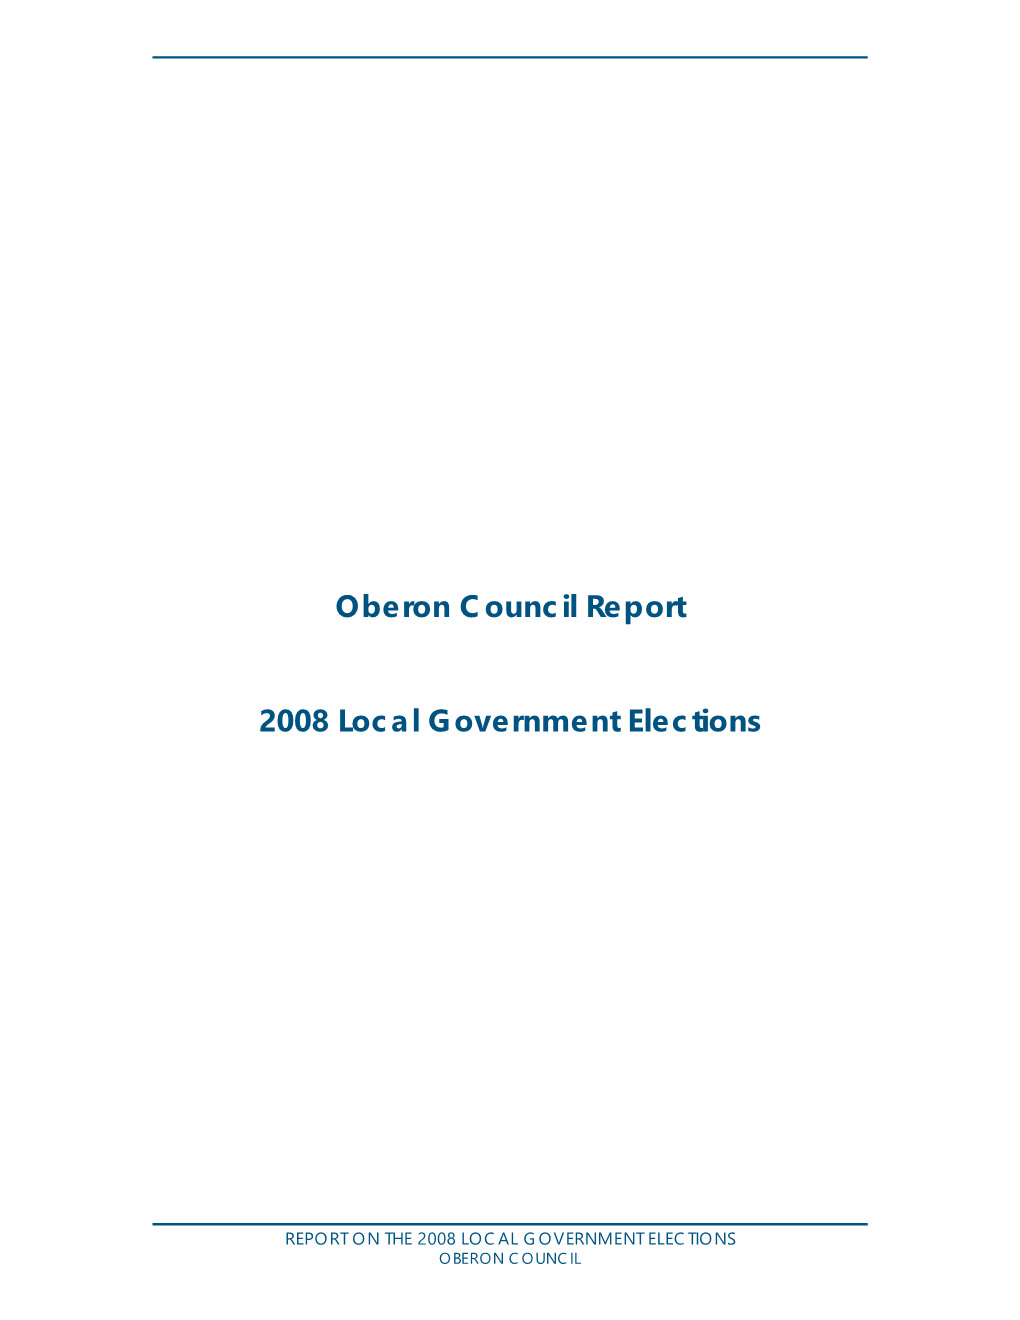 Oberon Council Report 2008 Local Government Elections